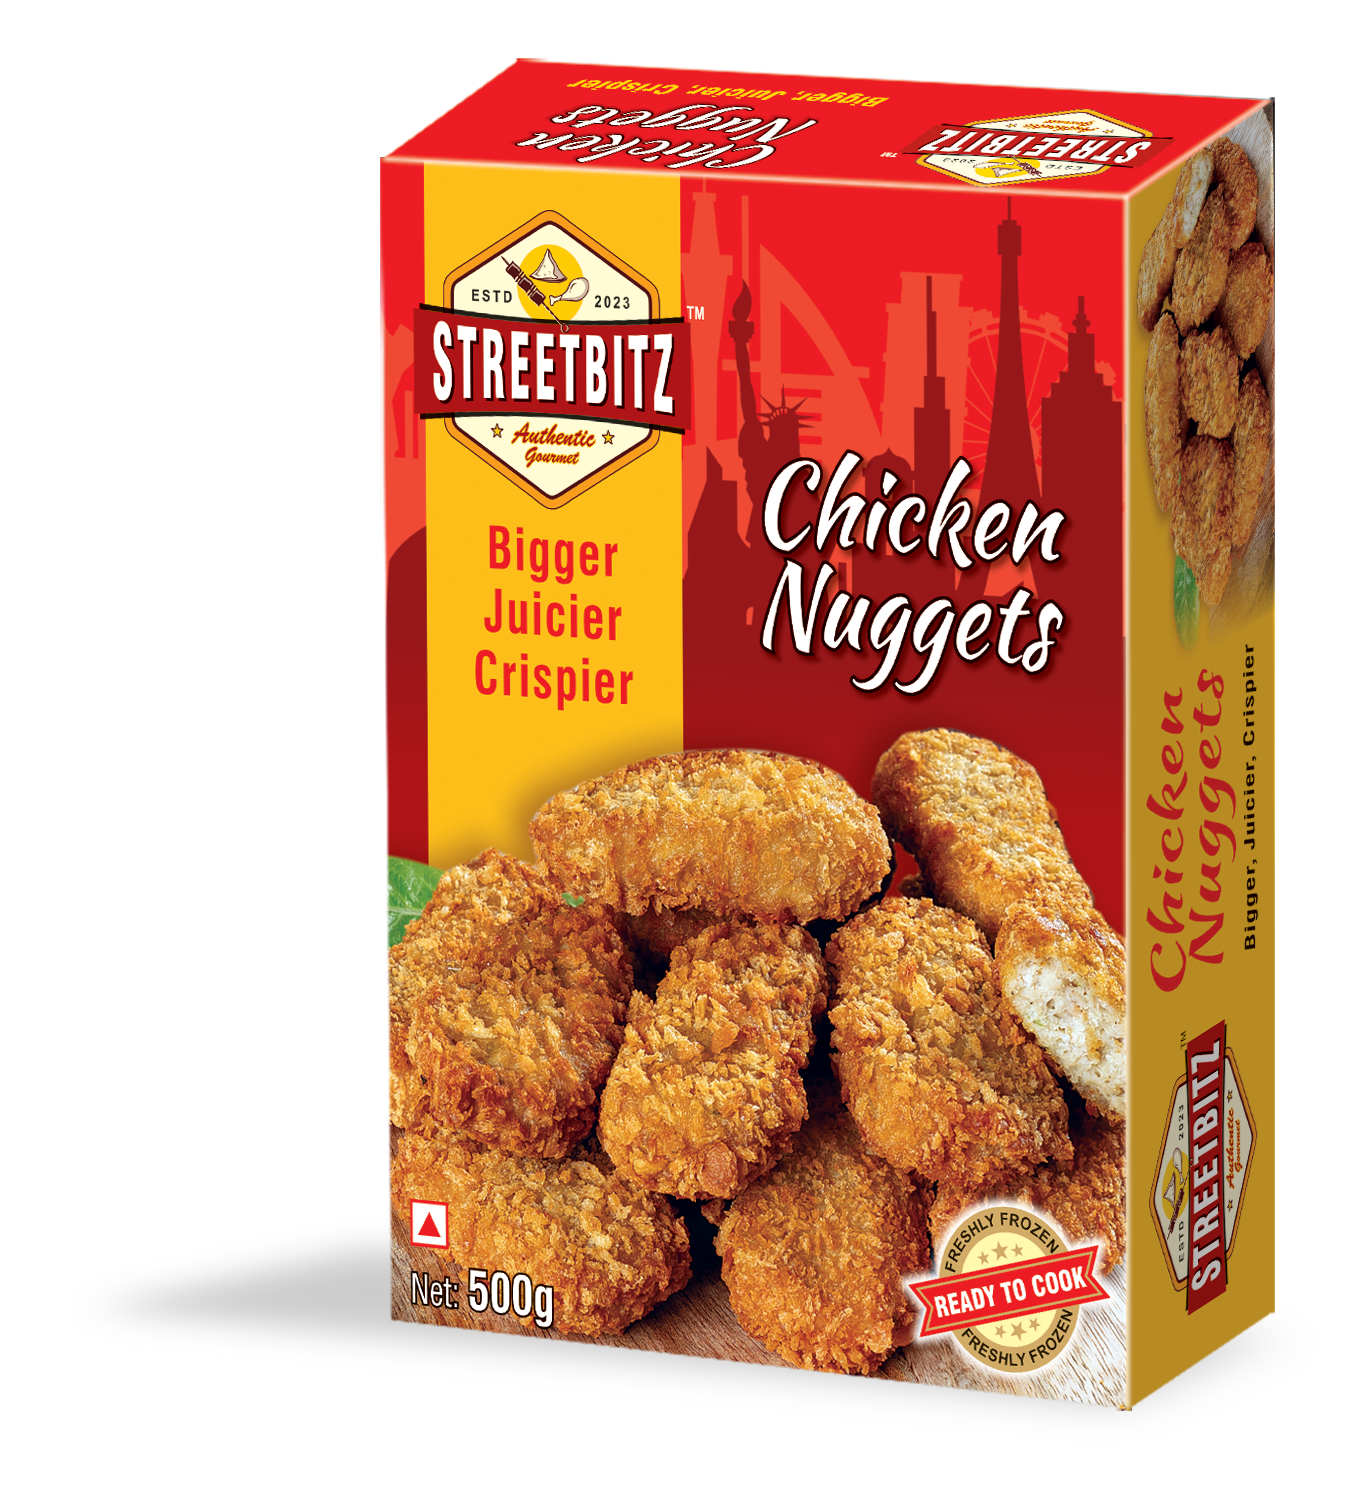 CHICKEN NUGGETS - AMERICAN STYLE